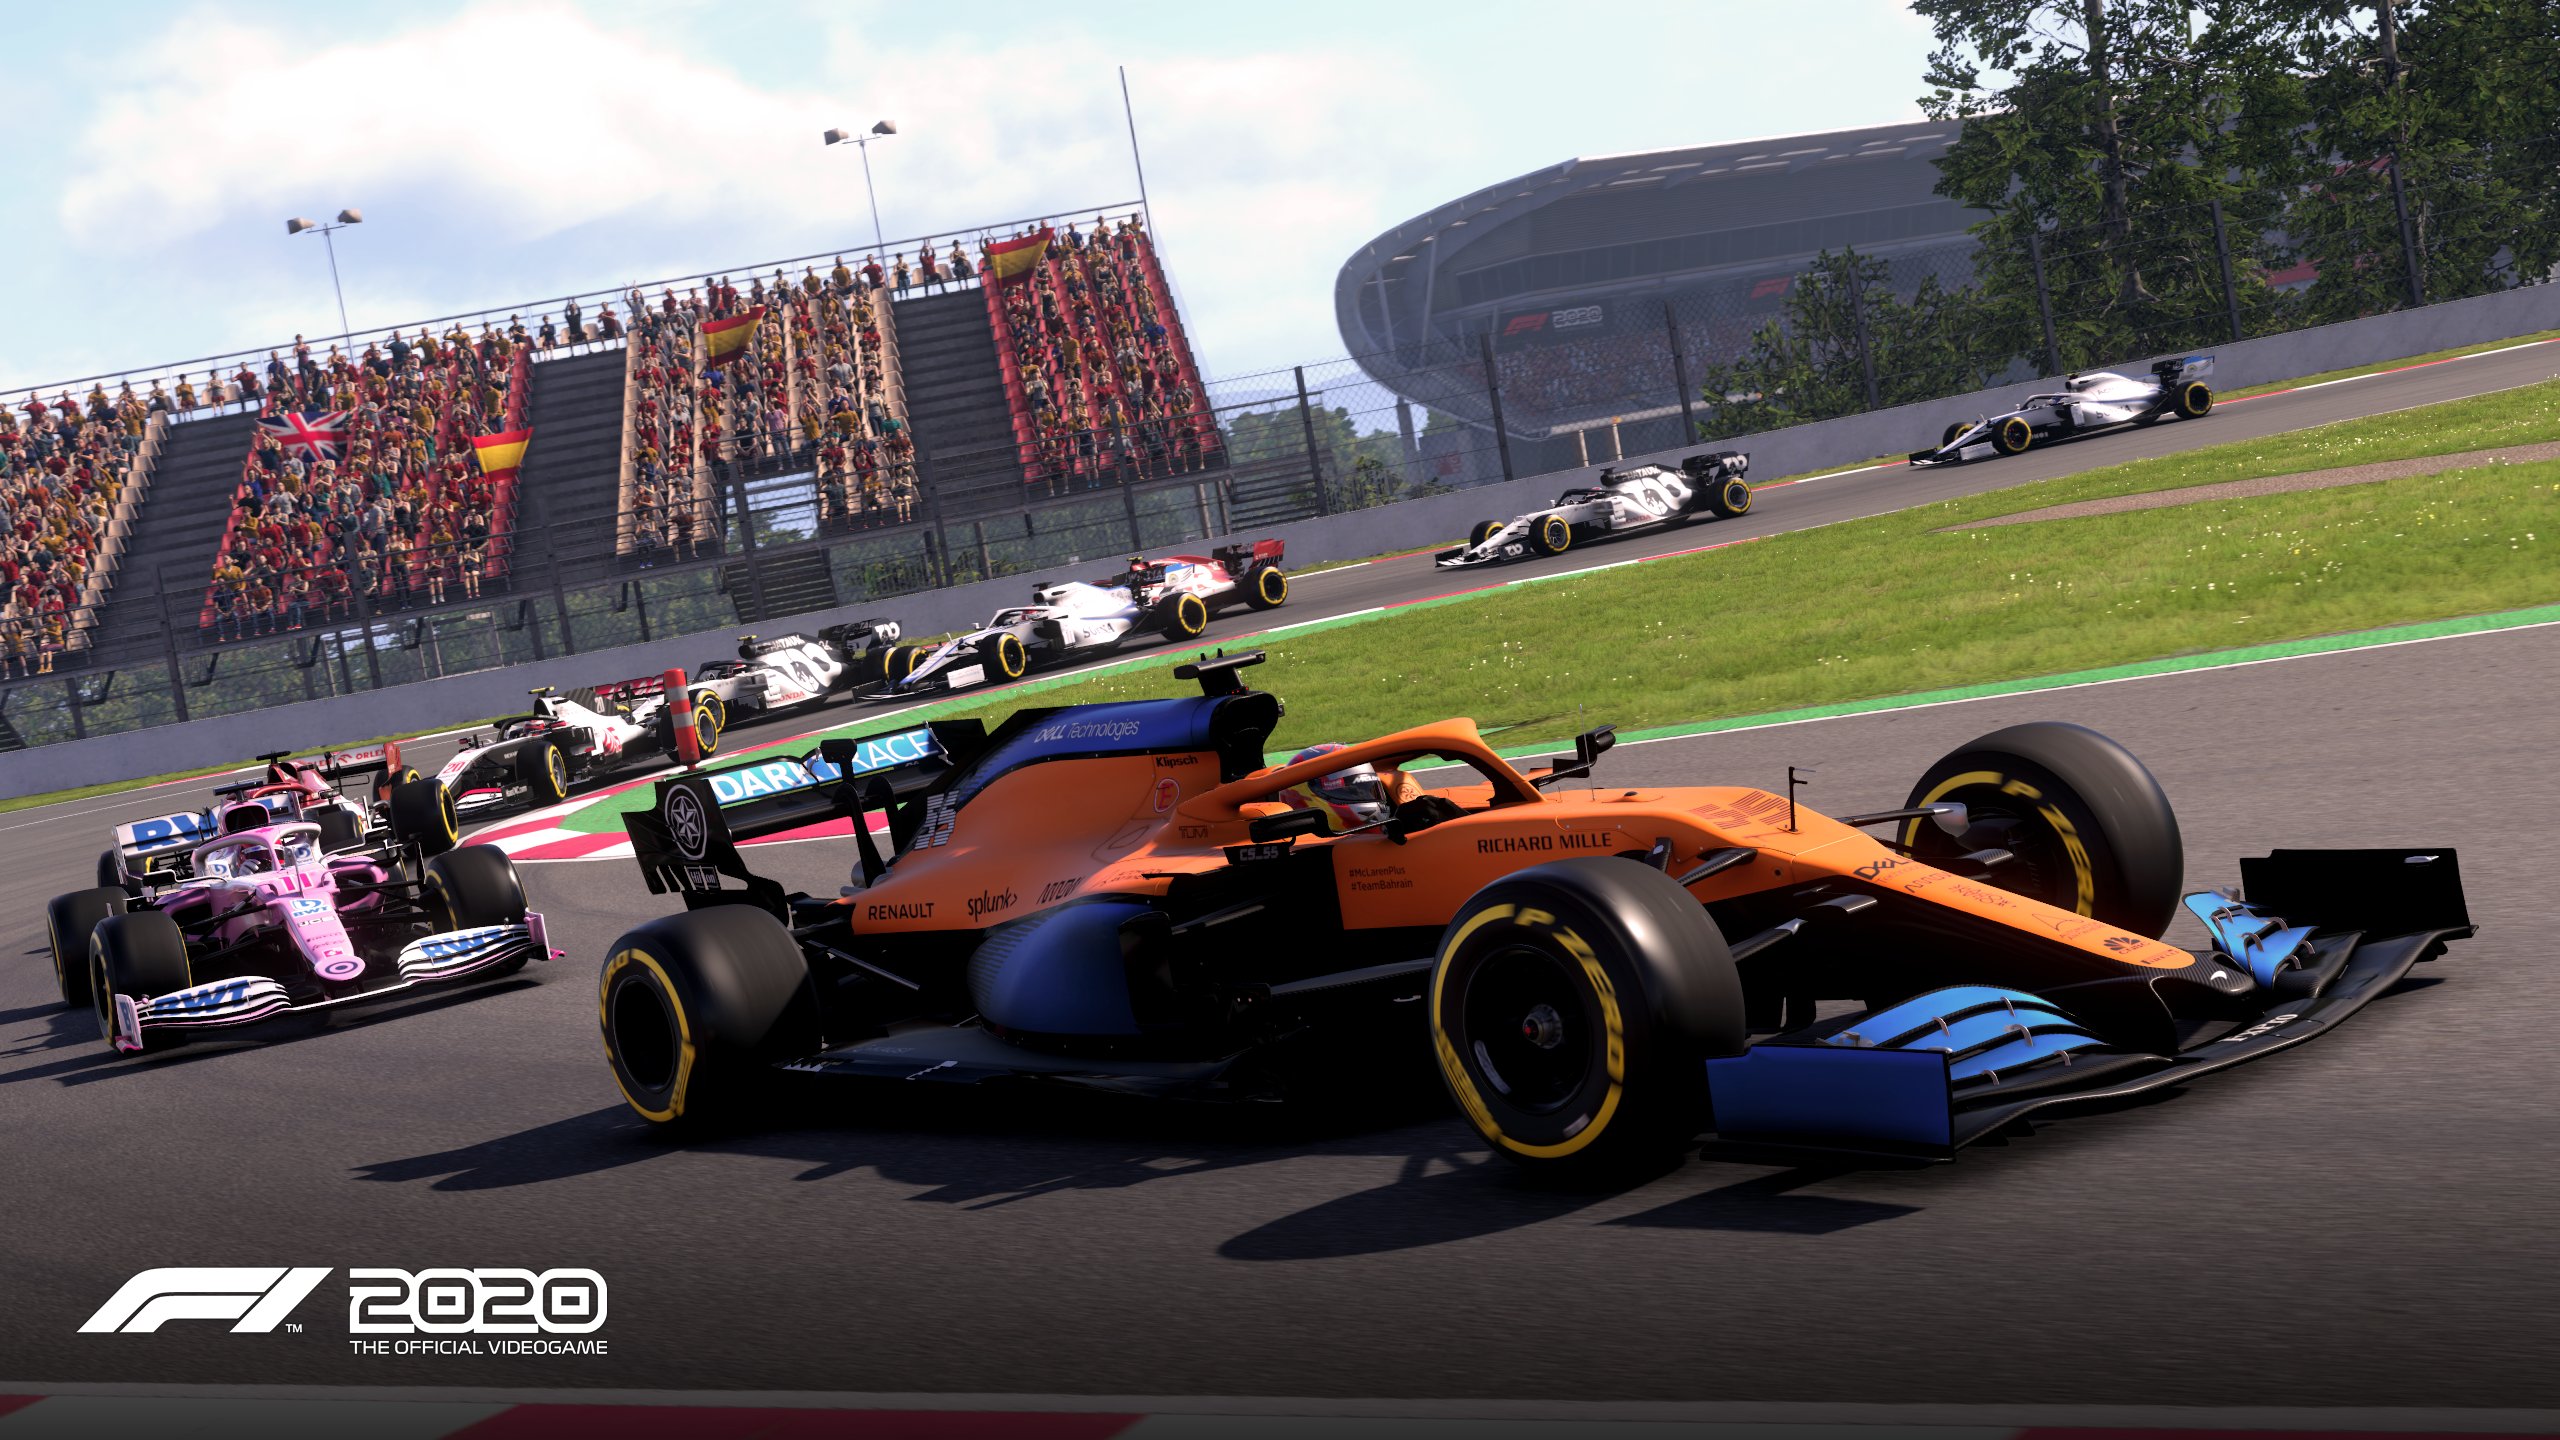 F1 2020 Available Today on PlayStation Now